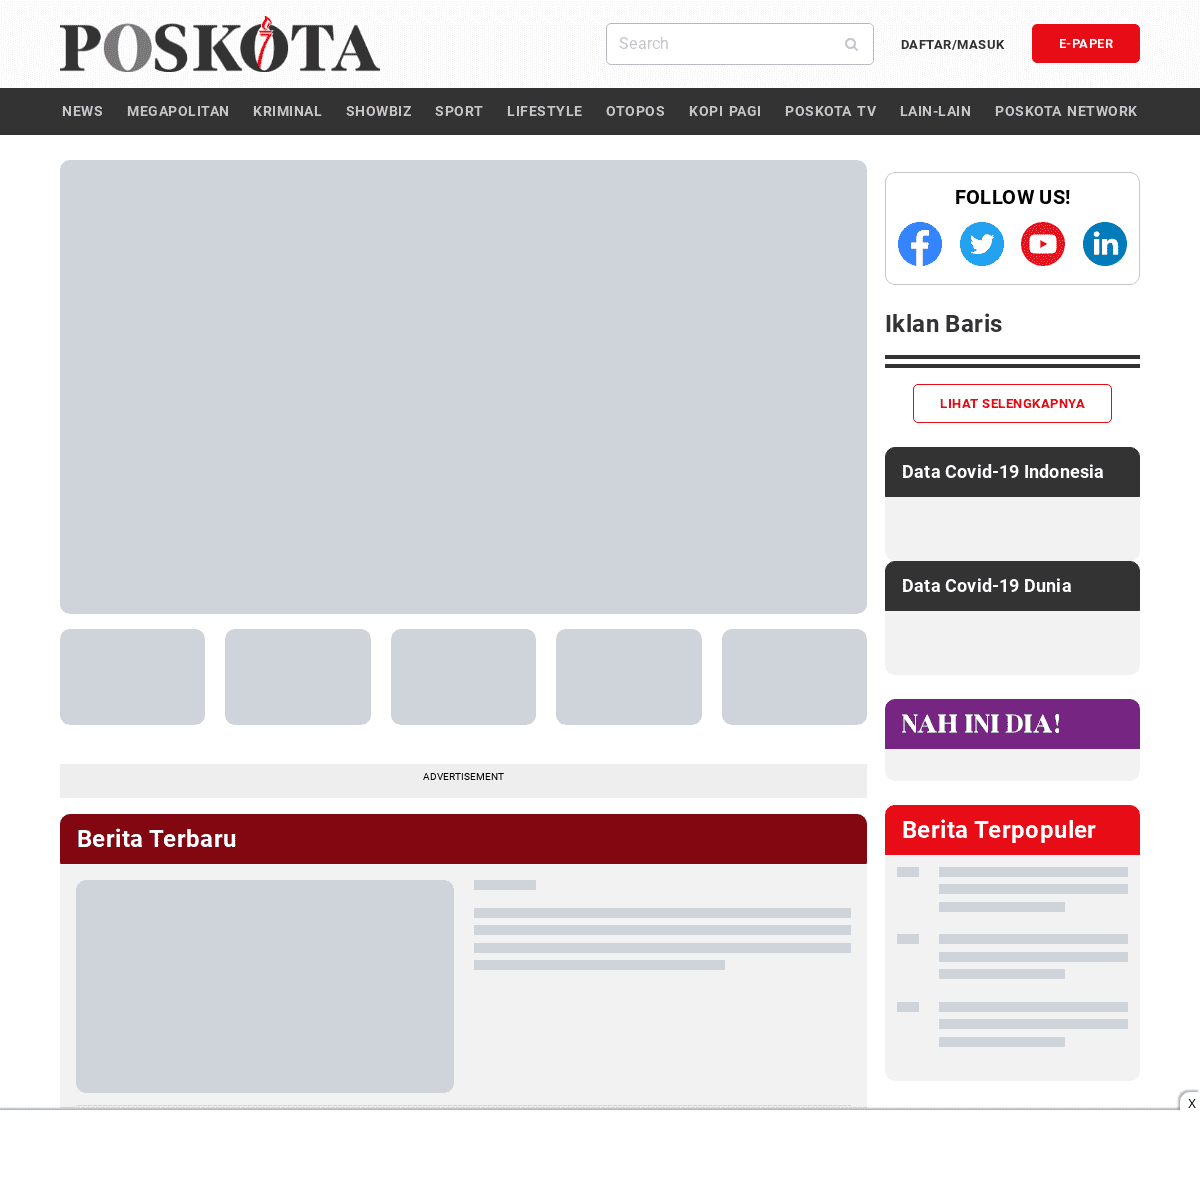 A complete backup of https://poskota.co.id